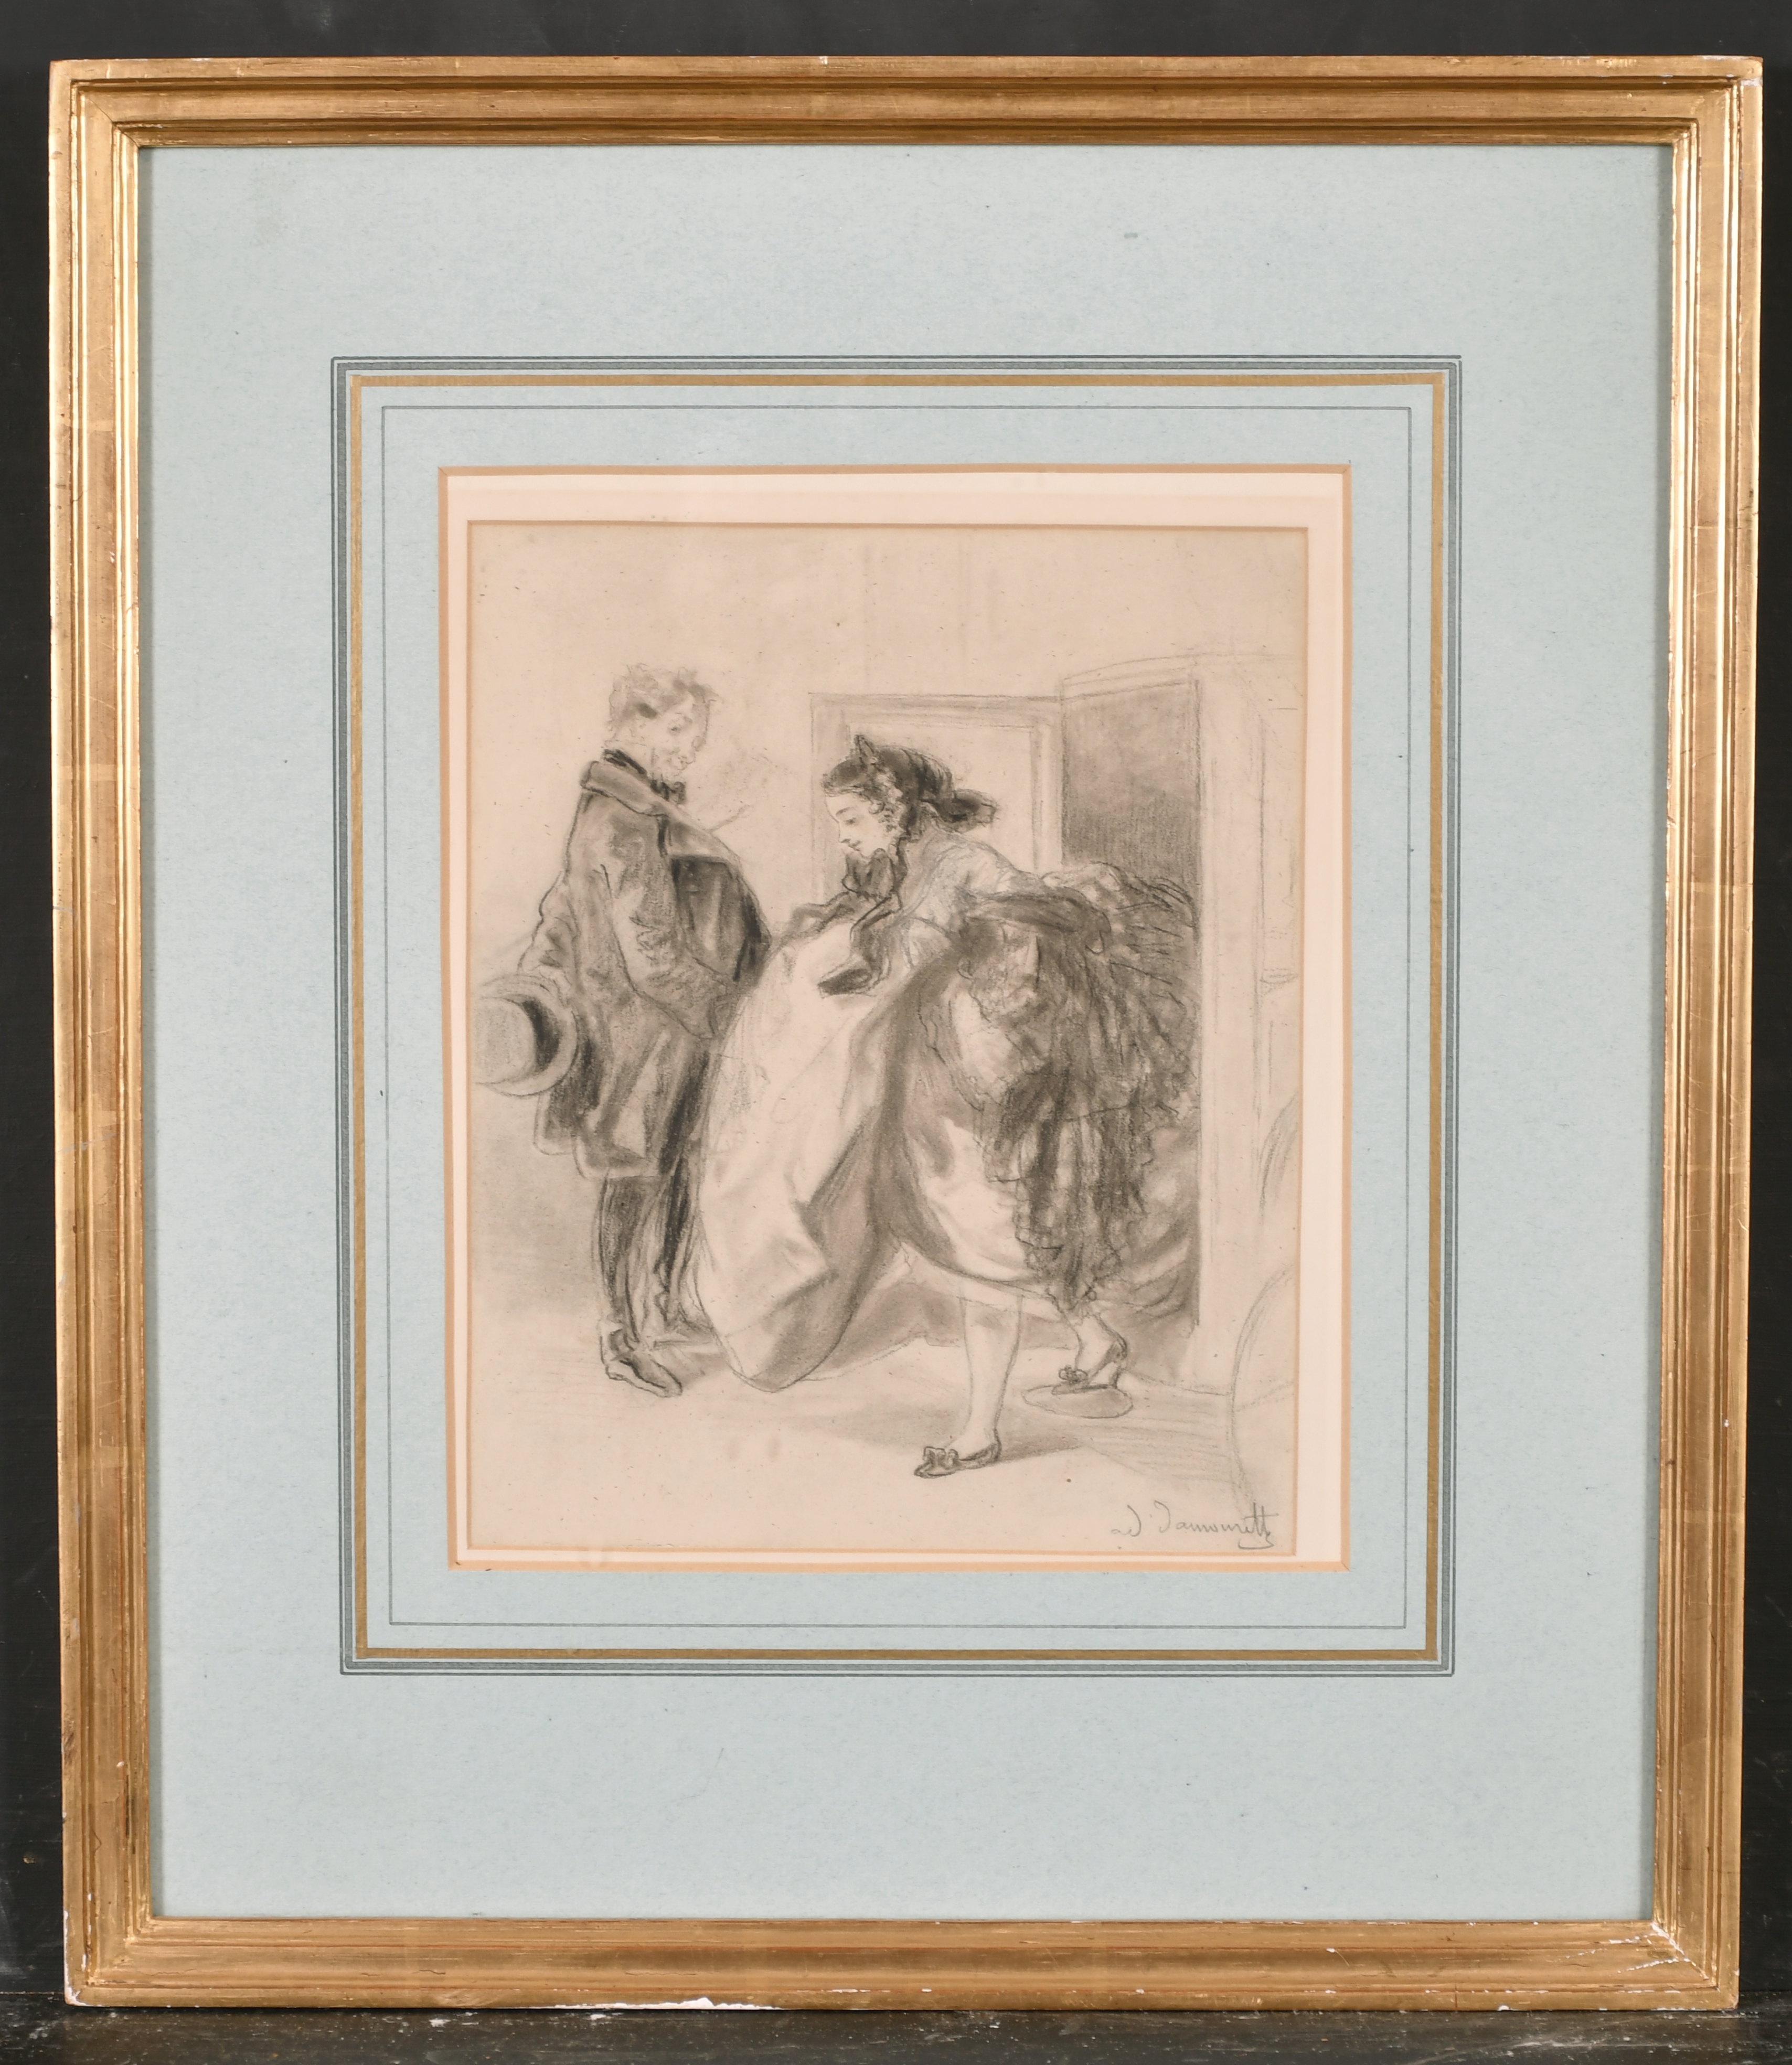 19th Century French School. A Lady getting out of a Carriage, Pencil and Charcoal, Indistinctly - Image 2 of 5